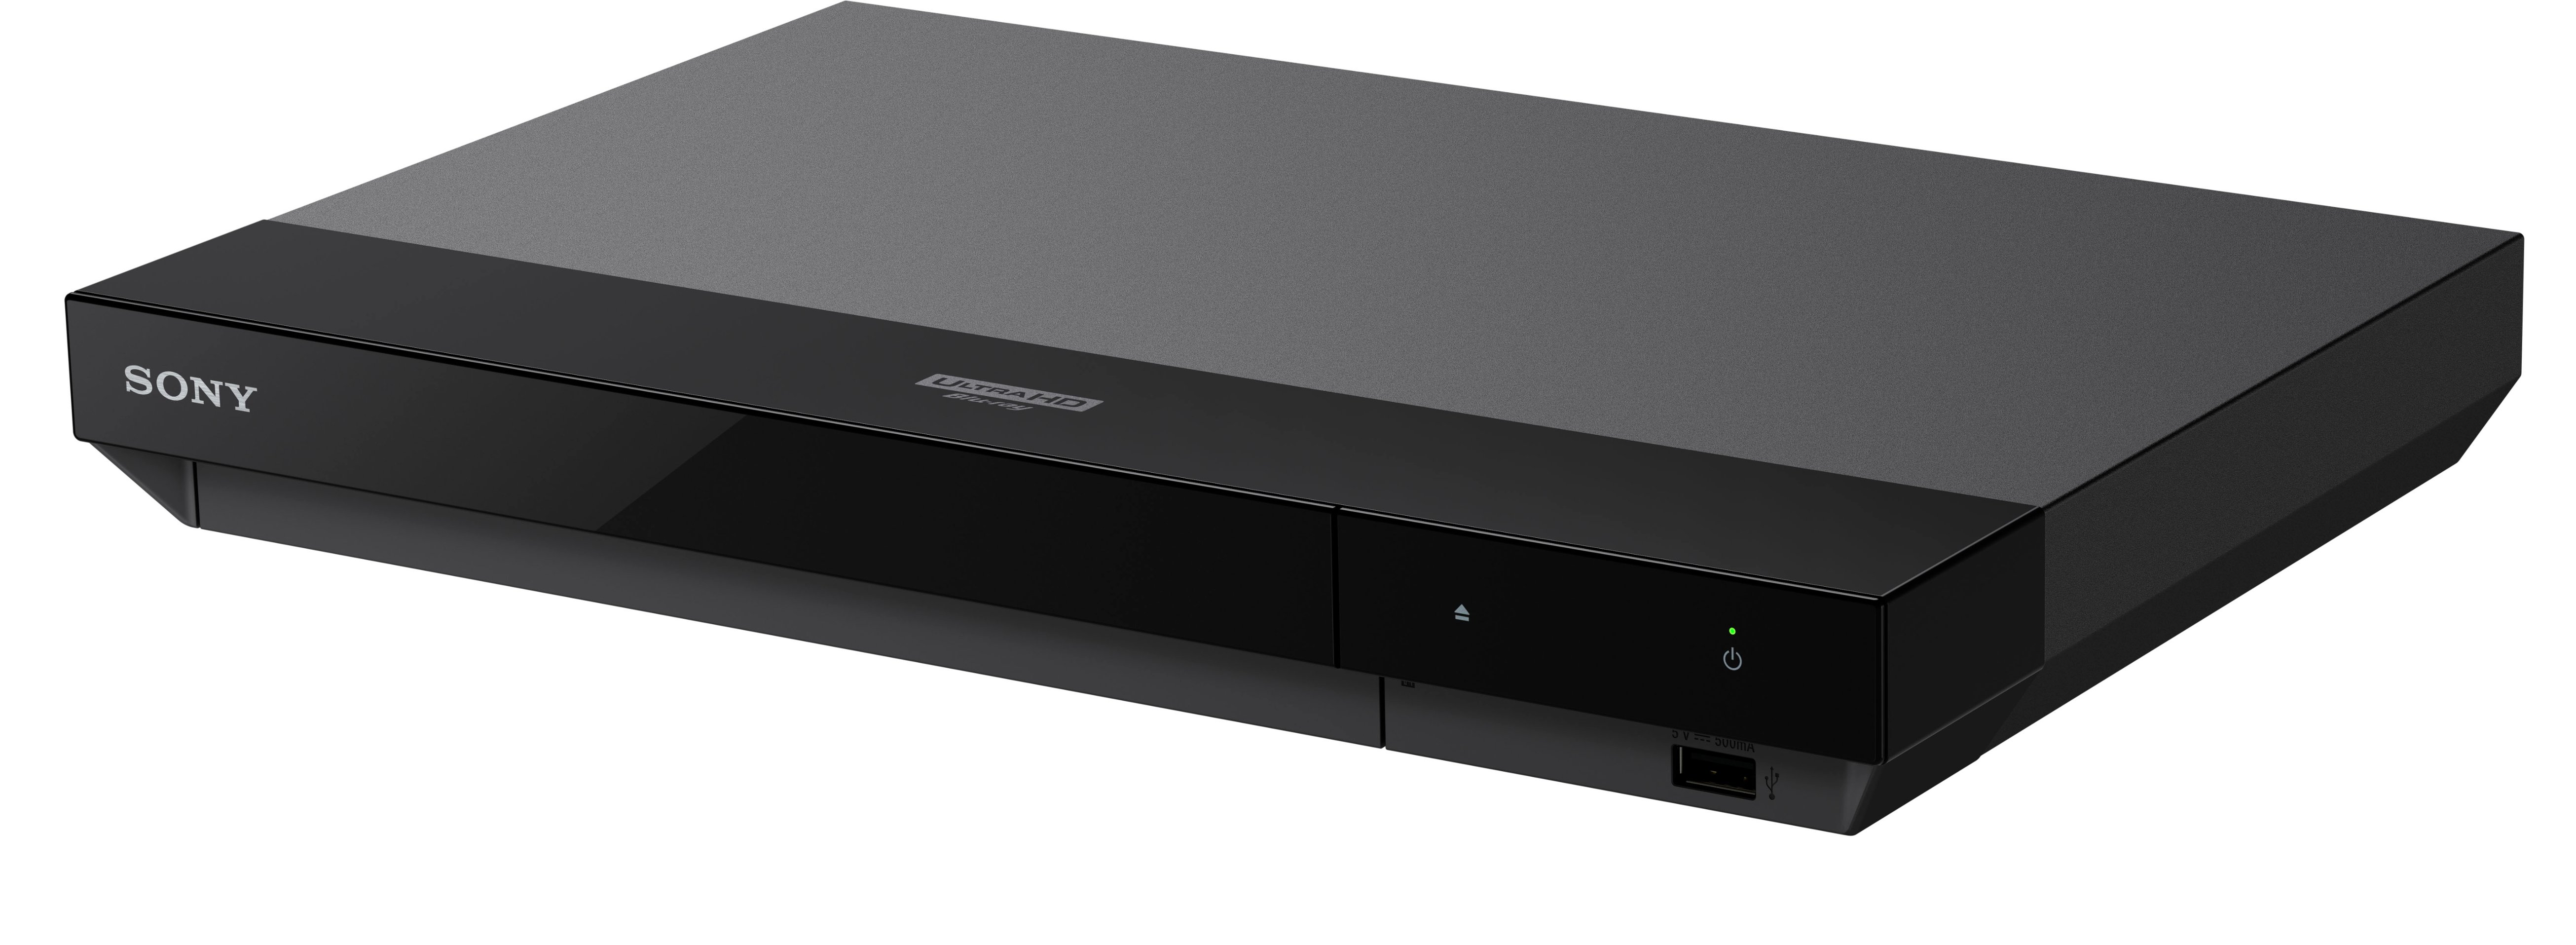 Samsung Adds Netflix Streaming to Blu-Ray Players